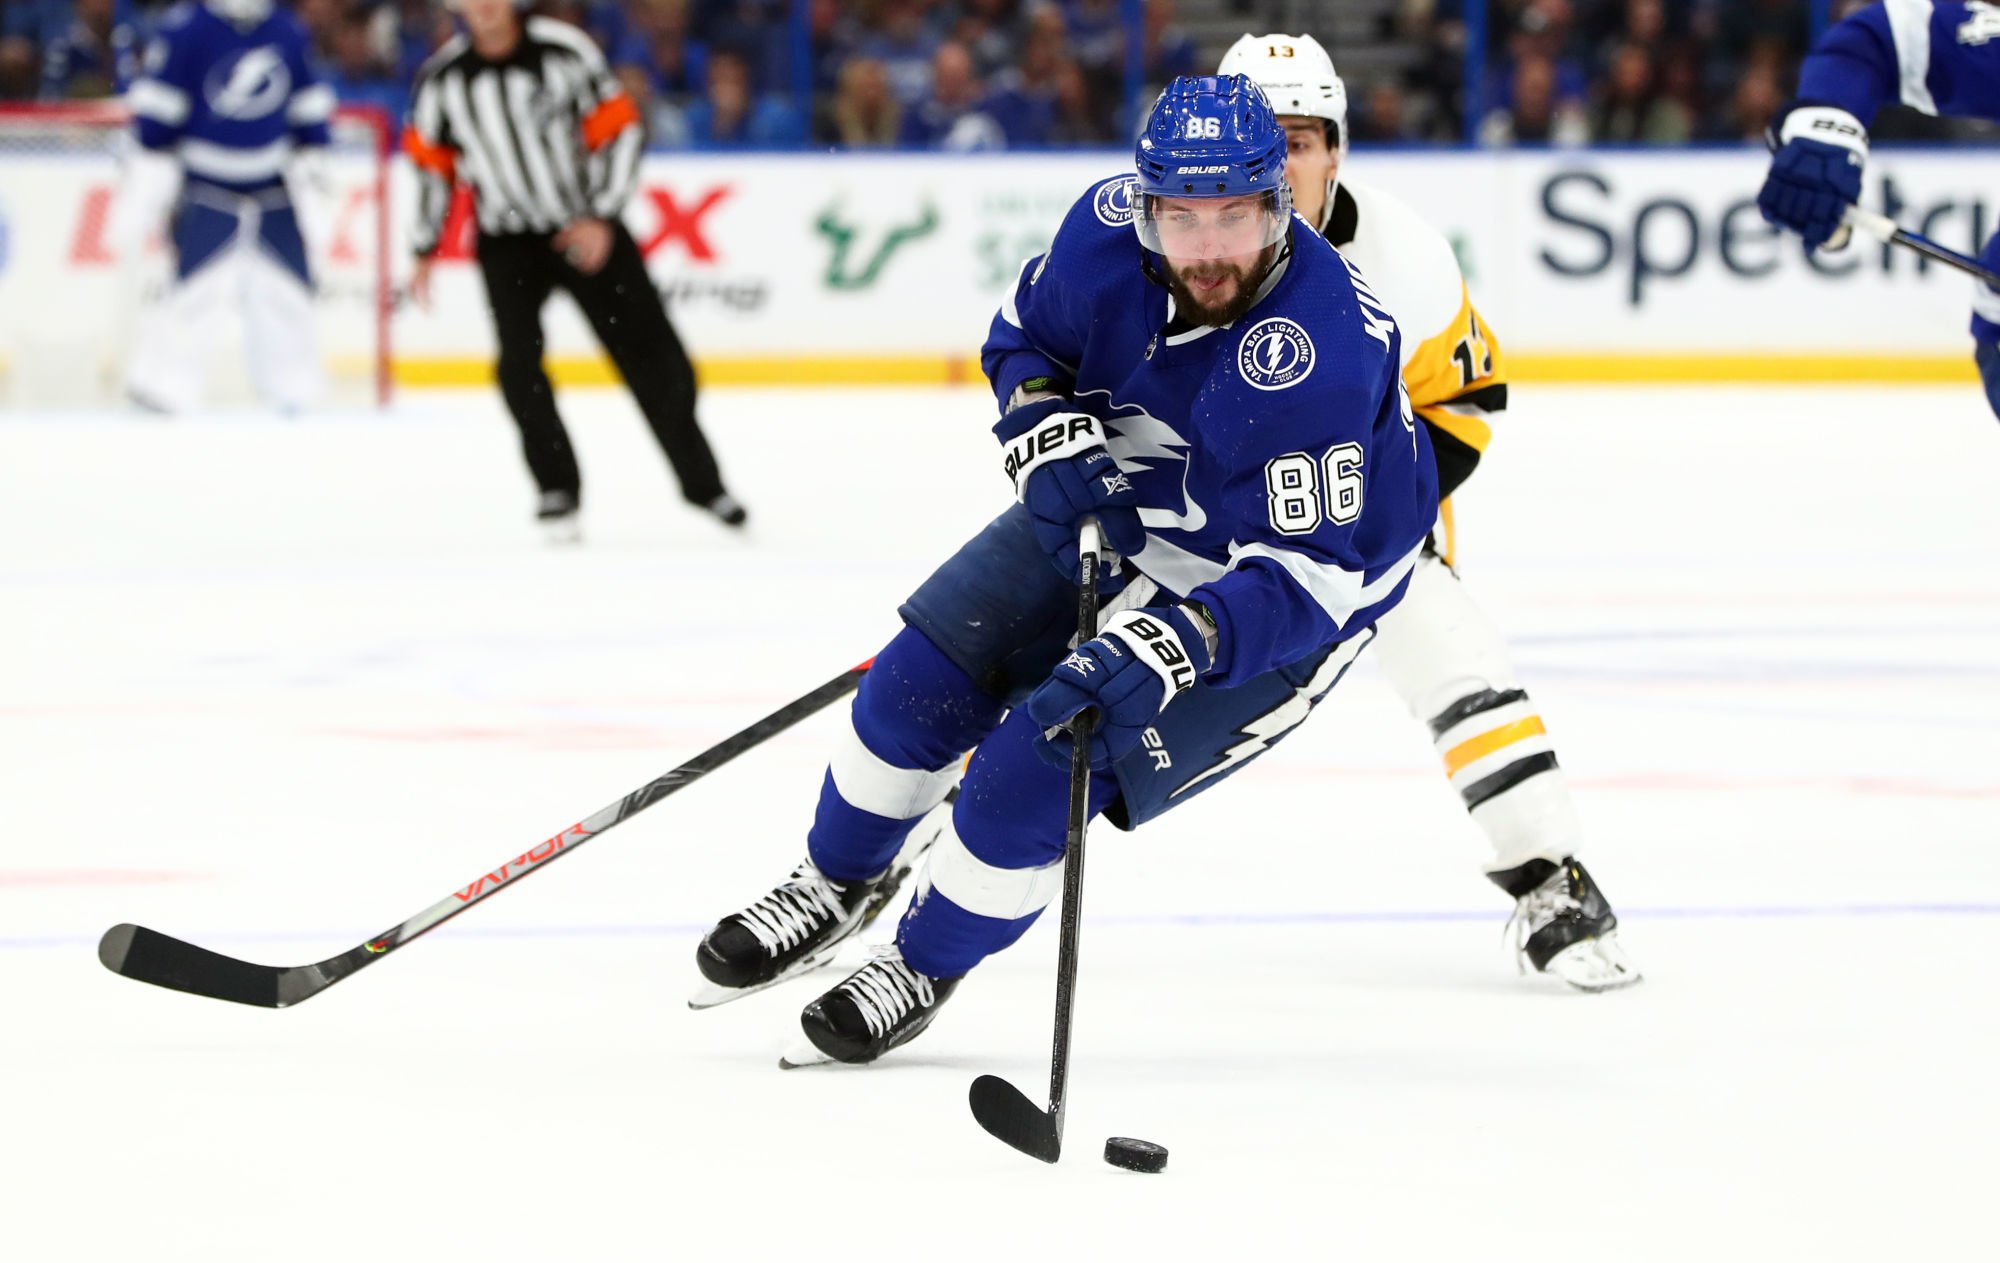 Oct 23, 2019; Tampa, FL, USA; Tampa Bay Lightning right wing Nikita Kucherov (86) skates wth the puck as Pittsburgh Penguins left wing Brandon Tanev (13) defends during the second period at Amalie Arena. Mandatory Credit: Kim Klement-USA TODAY Sports 

Photo by Icon Sport - Brandon TANEV - Nikita KUCHEROV - Amalie Arena - Tampa (Etats Unis)